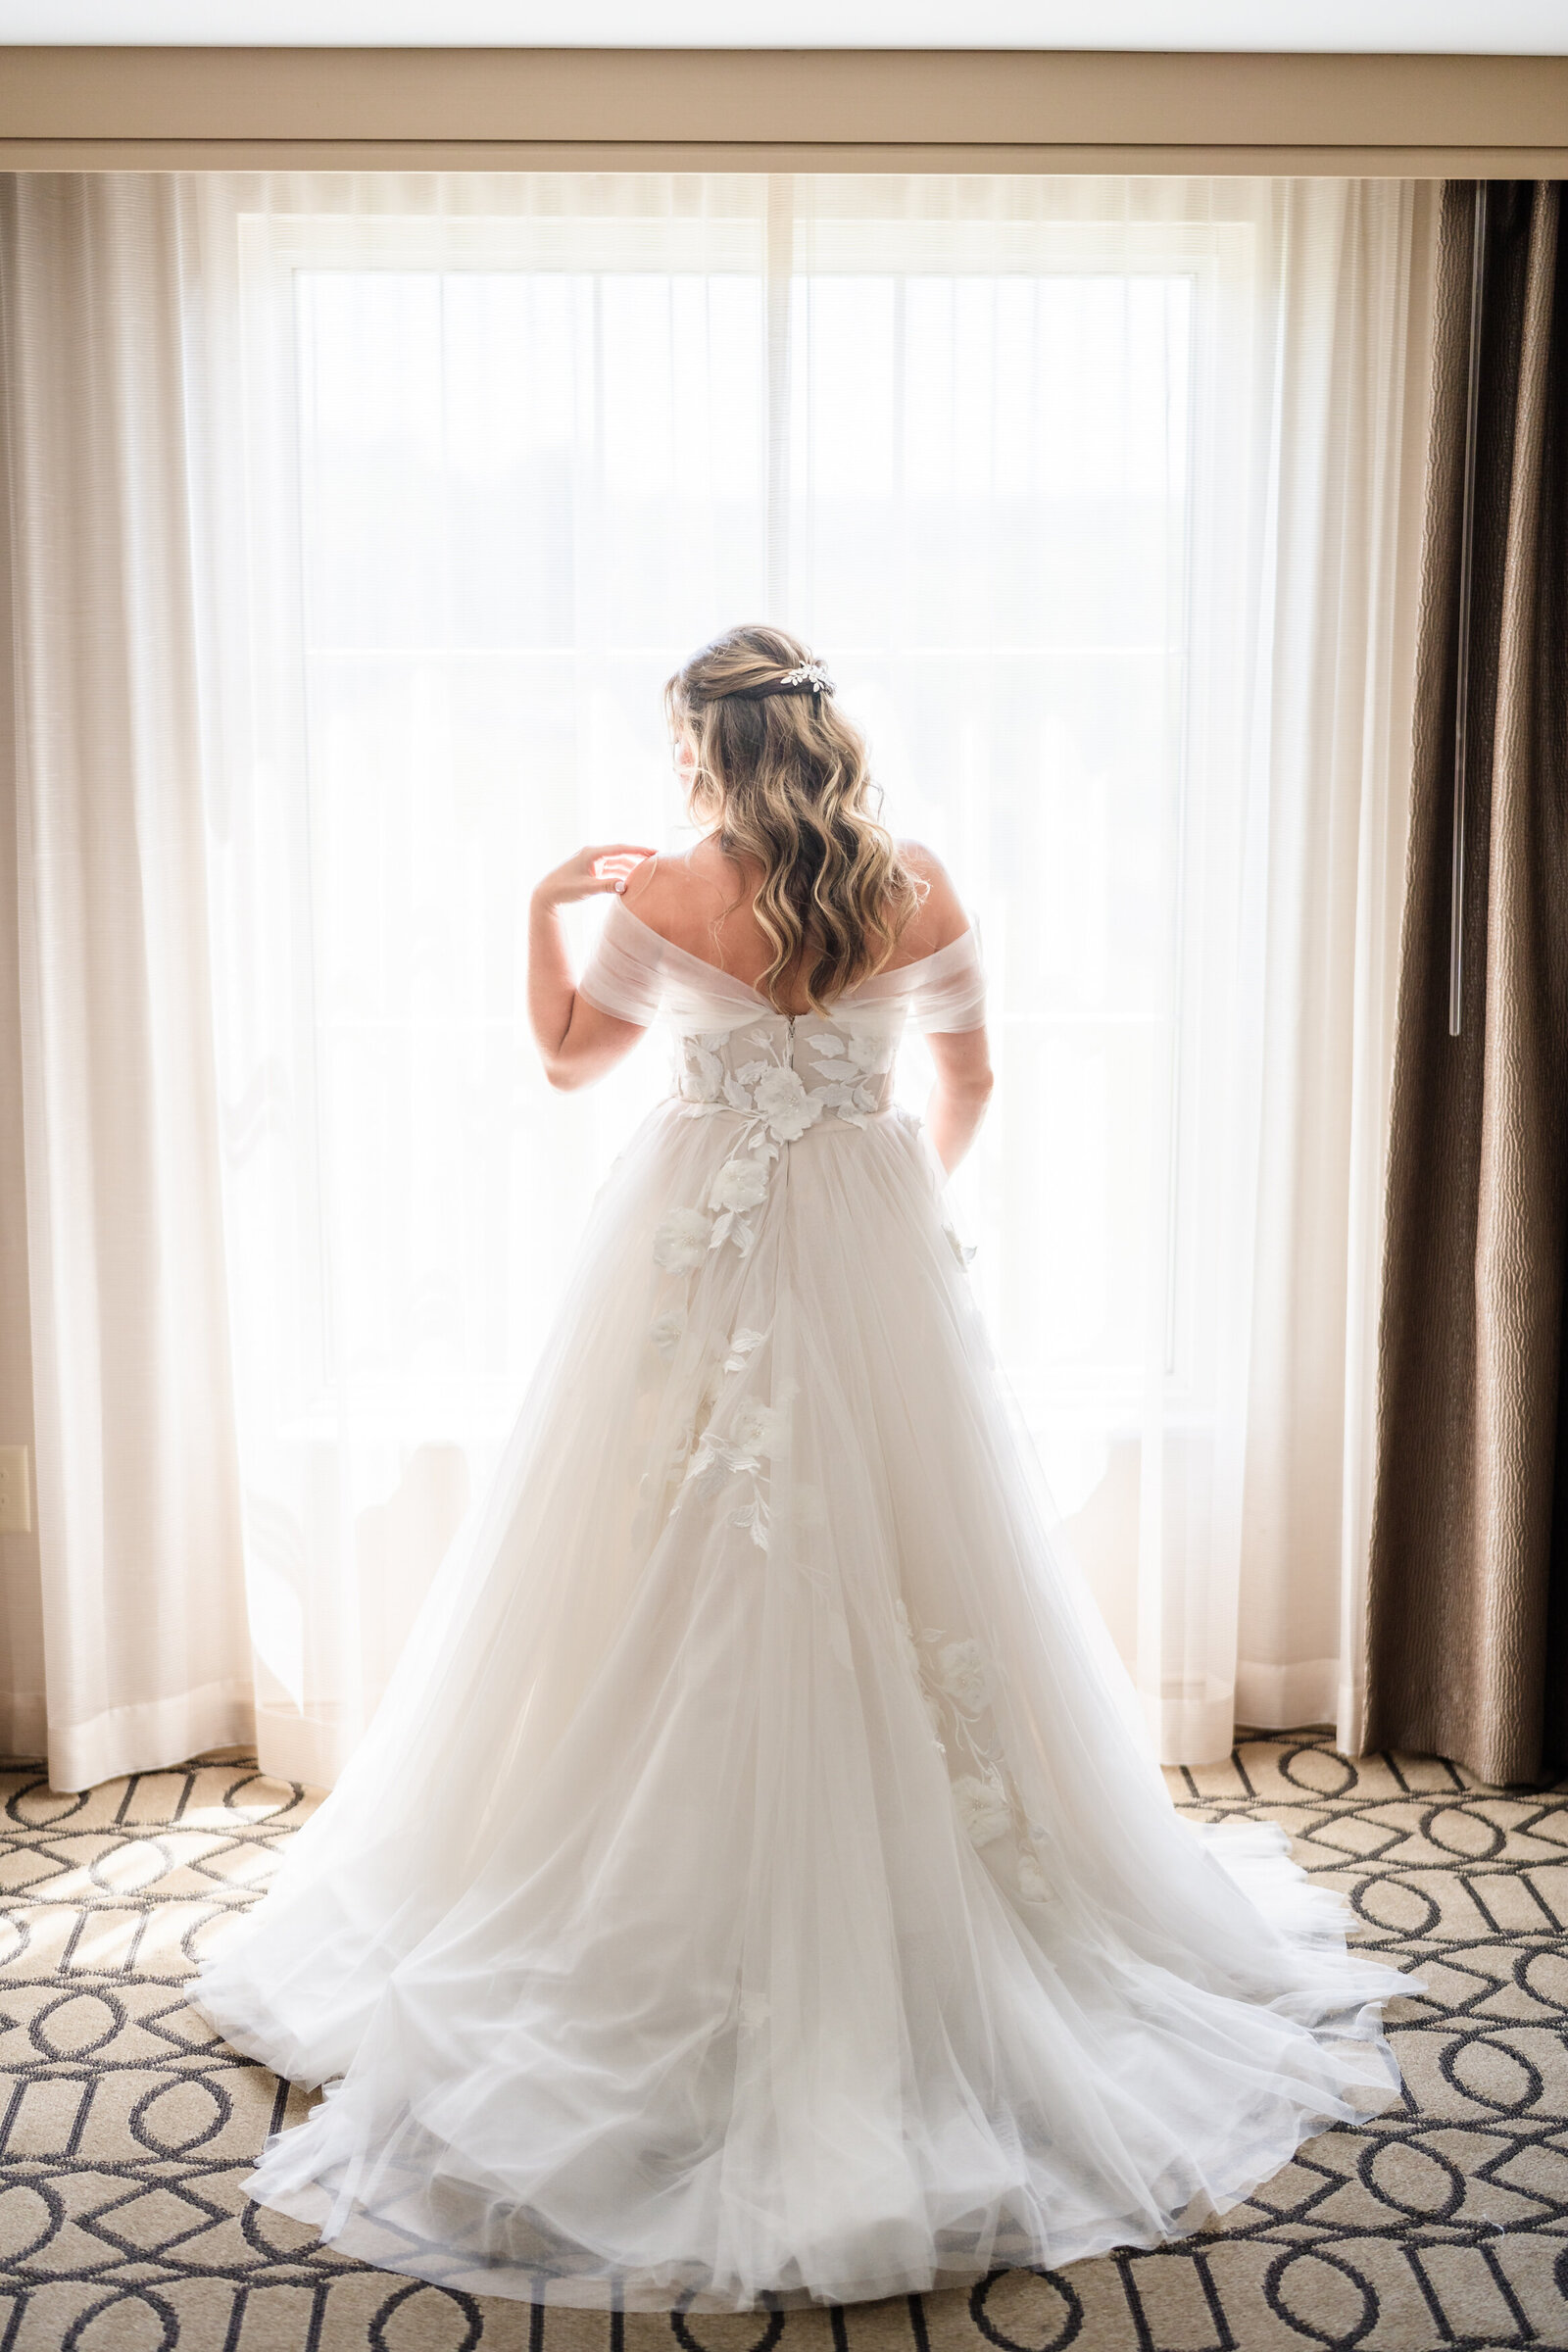 Bride shows off the details of her wedding dress while standing in the window of her suite at the Hilton